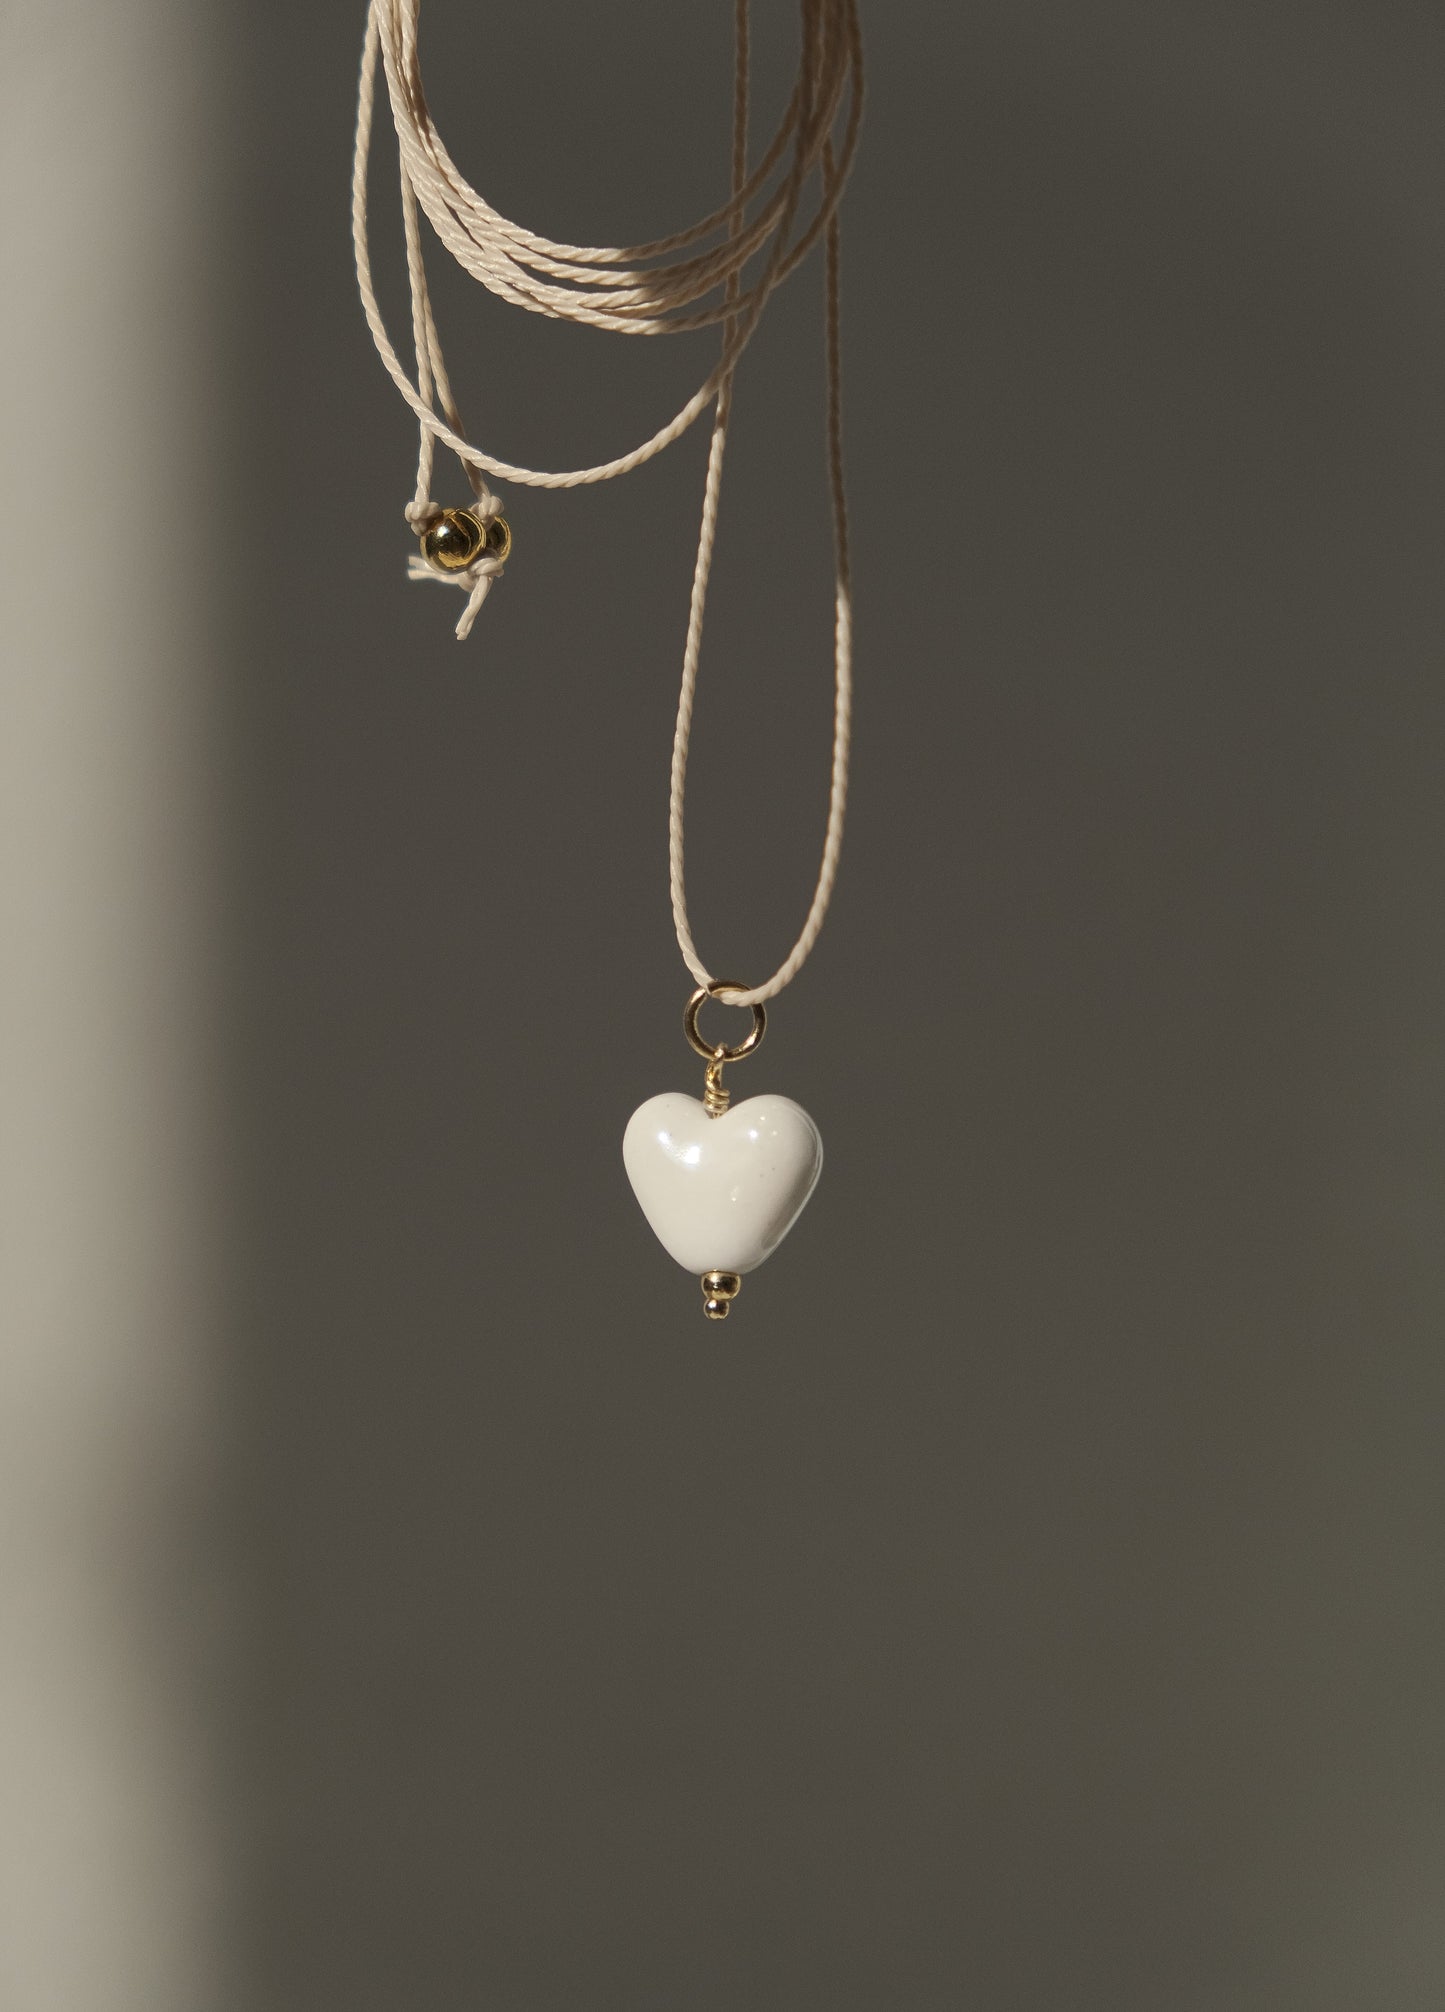 Pendant with a Ceramic heart